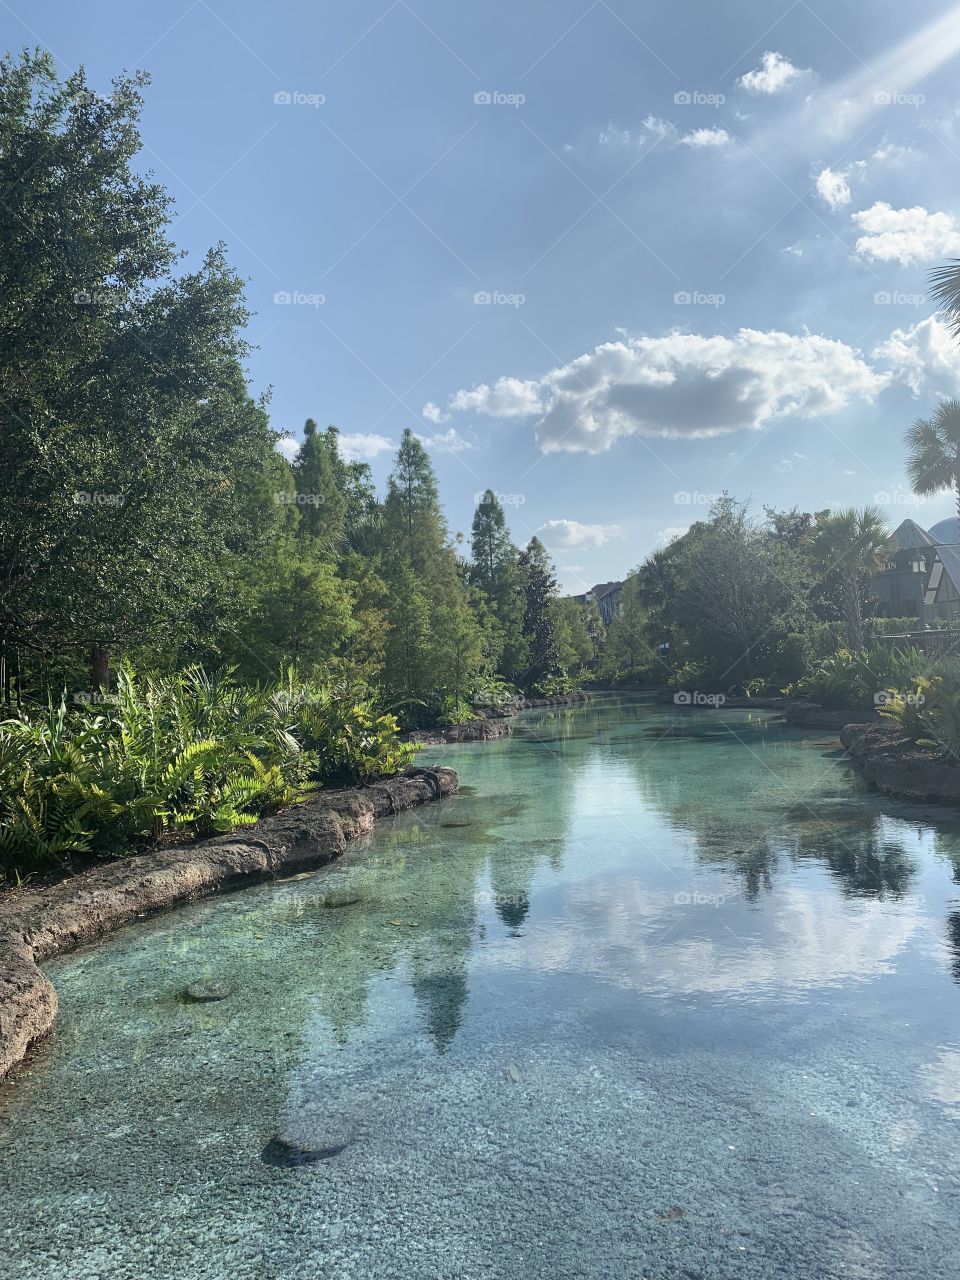 Awesome shot taken at Disney Springs. Blue hues, vivid green plantation. What better way to capture the magic in Disney?